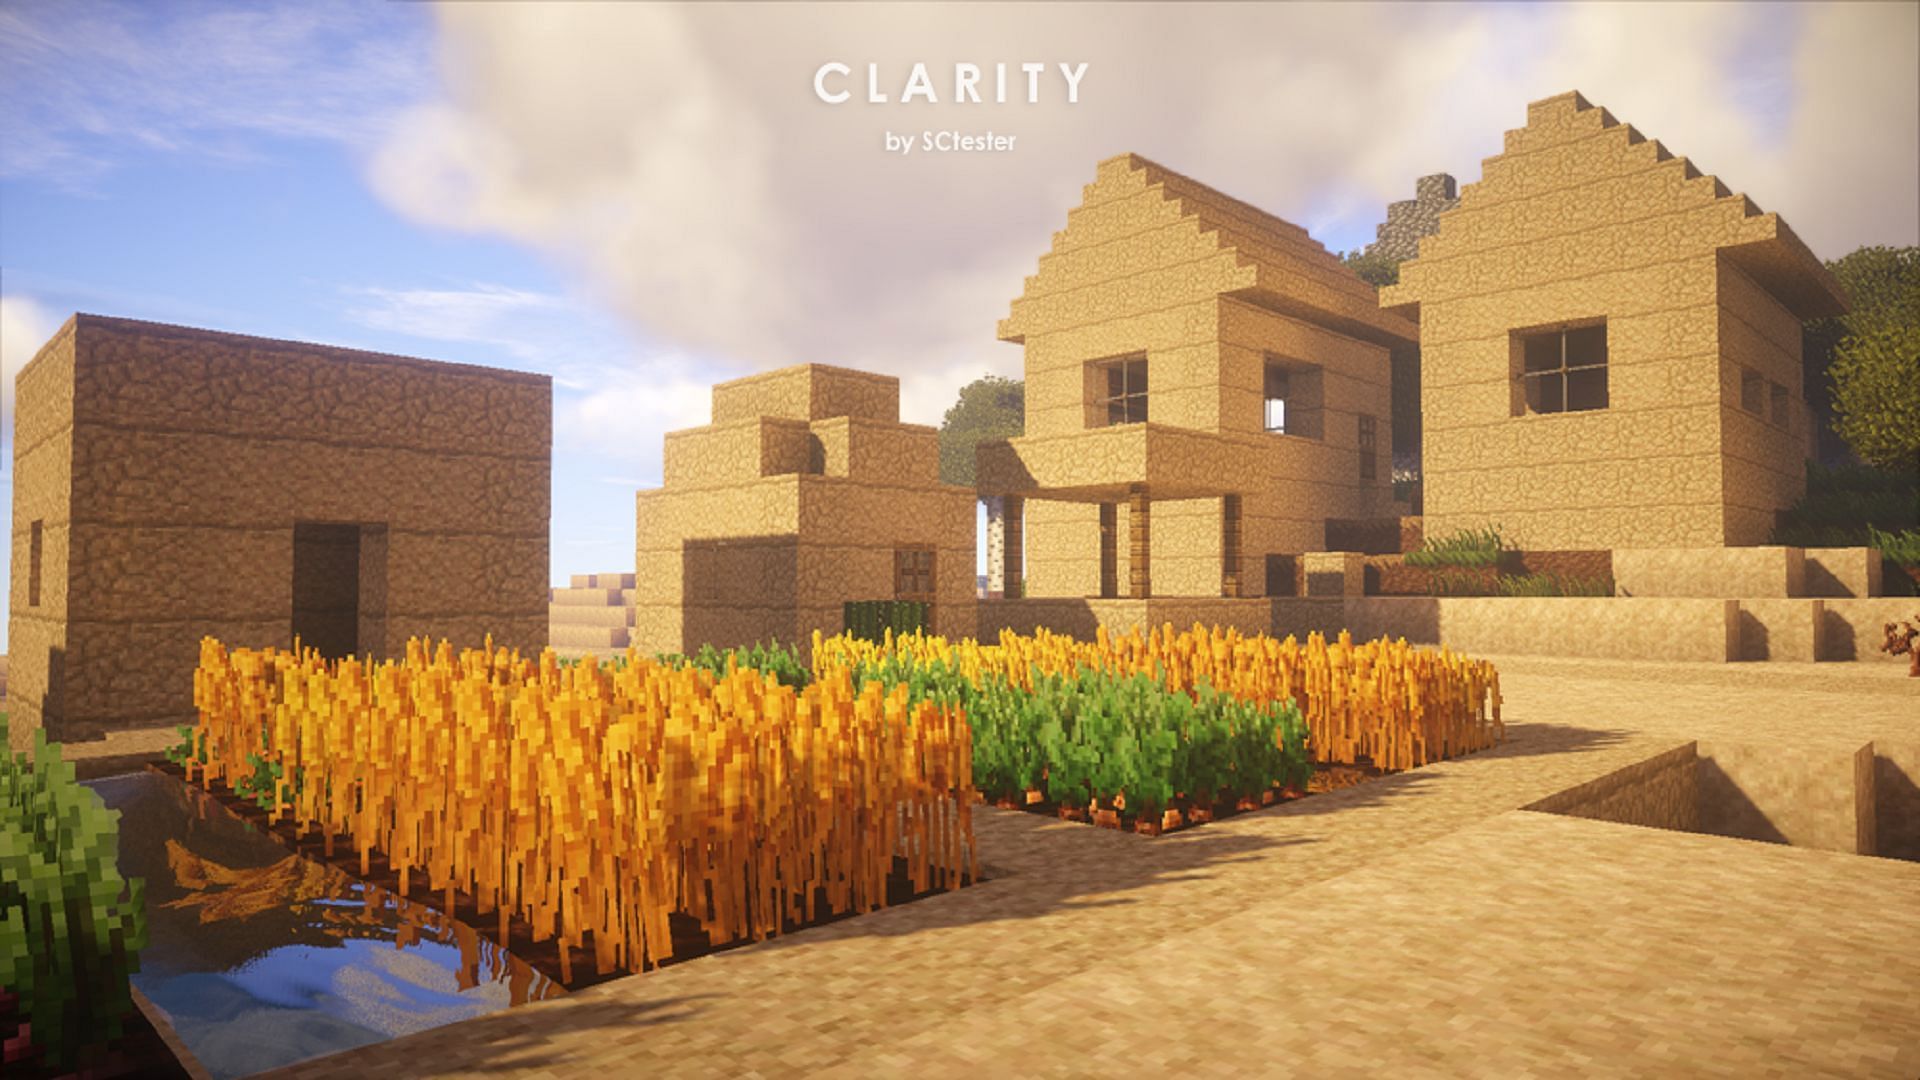 Clarity presents its own unique and high-definition take on Minecraft&#039;s traditional textures. (Image via SCtester/CurseForge)